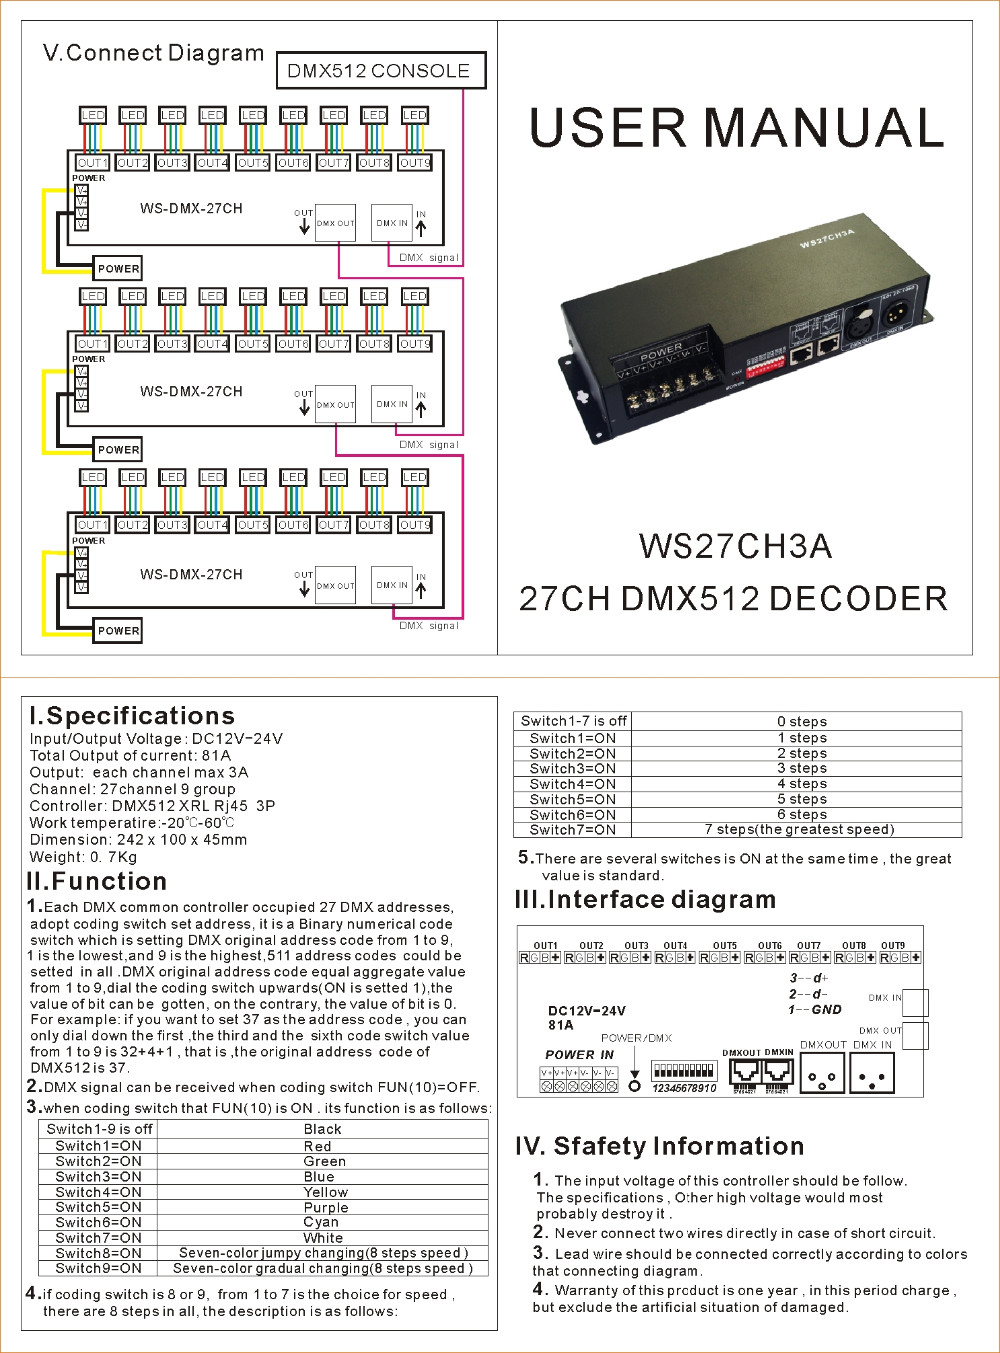 DMX_Controllers_and_Decoders_WS27CH3A_2